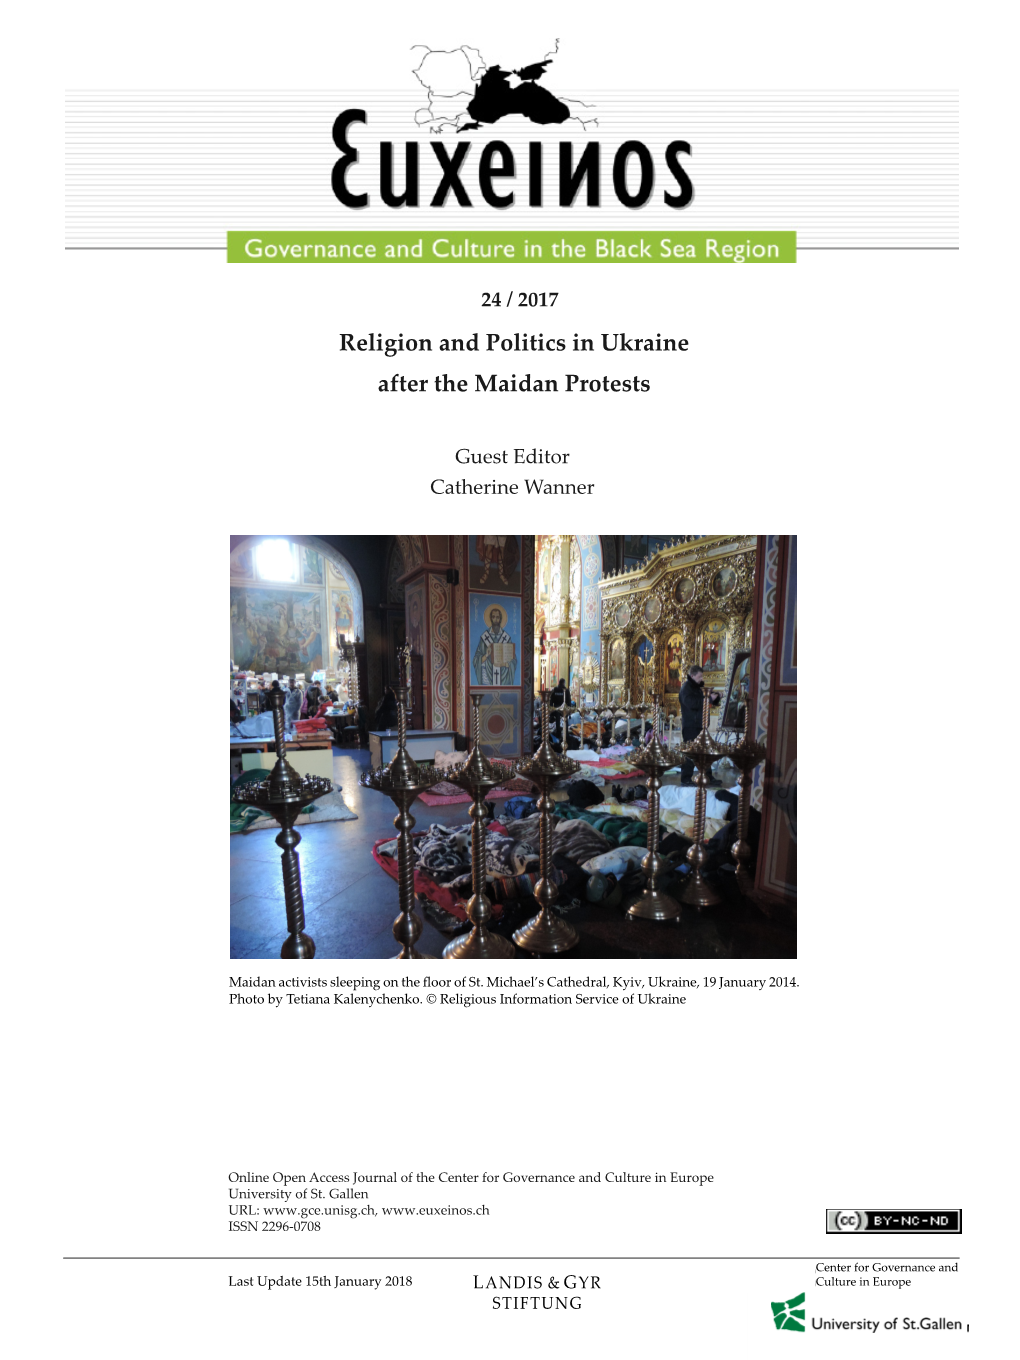 Religion and Politics in Ukraine After the Maidan Protests